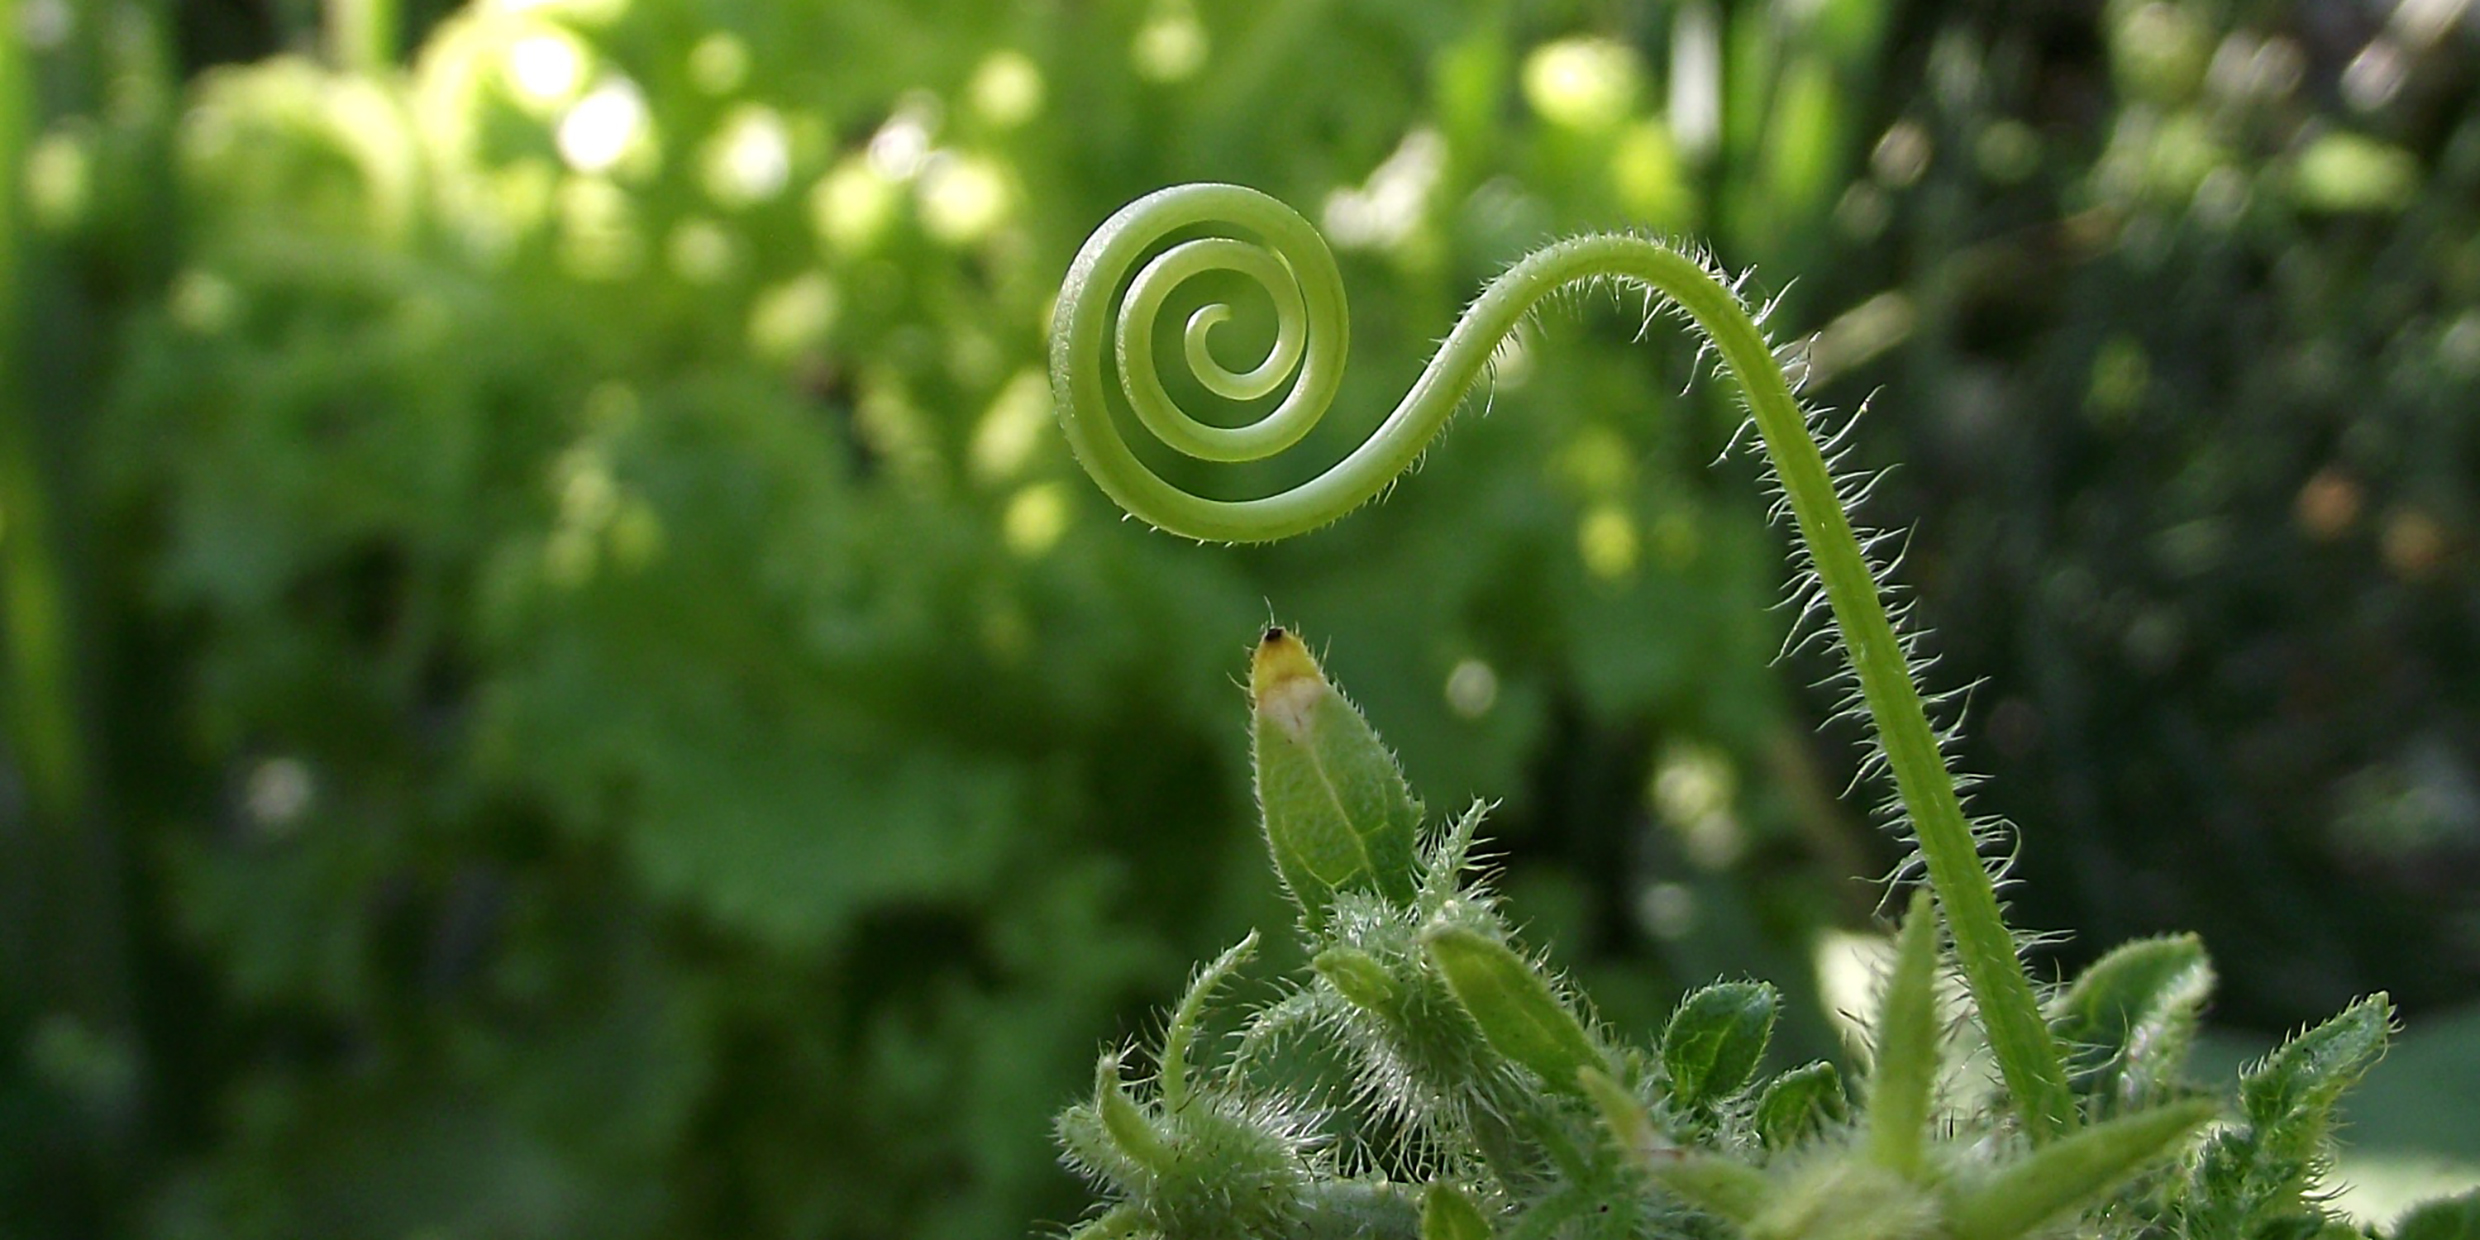 Image of a spiral-shaped plant tendril